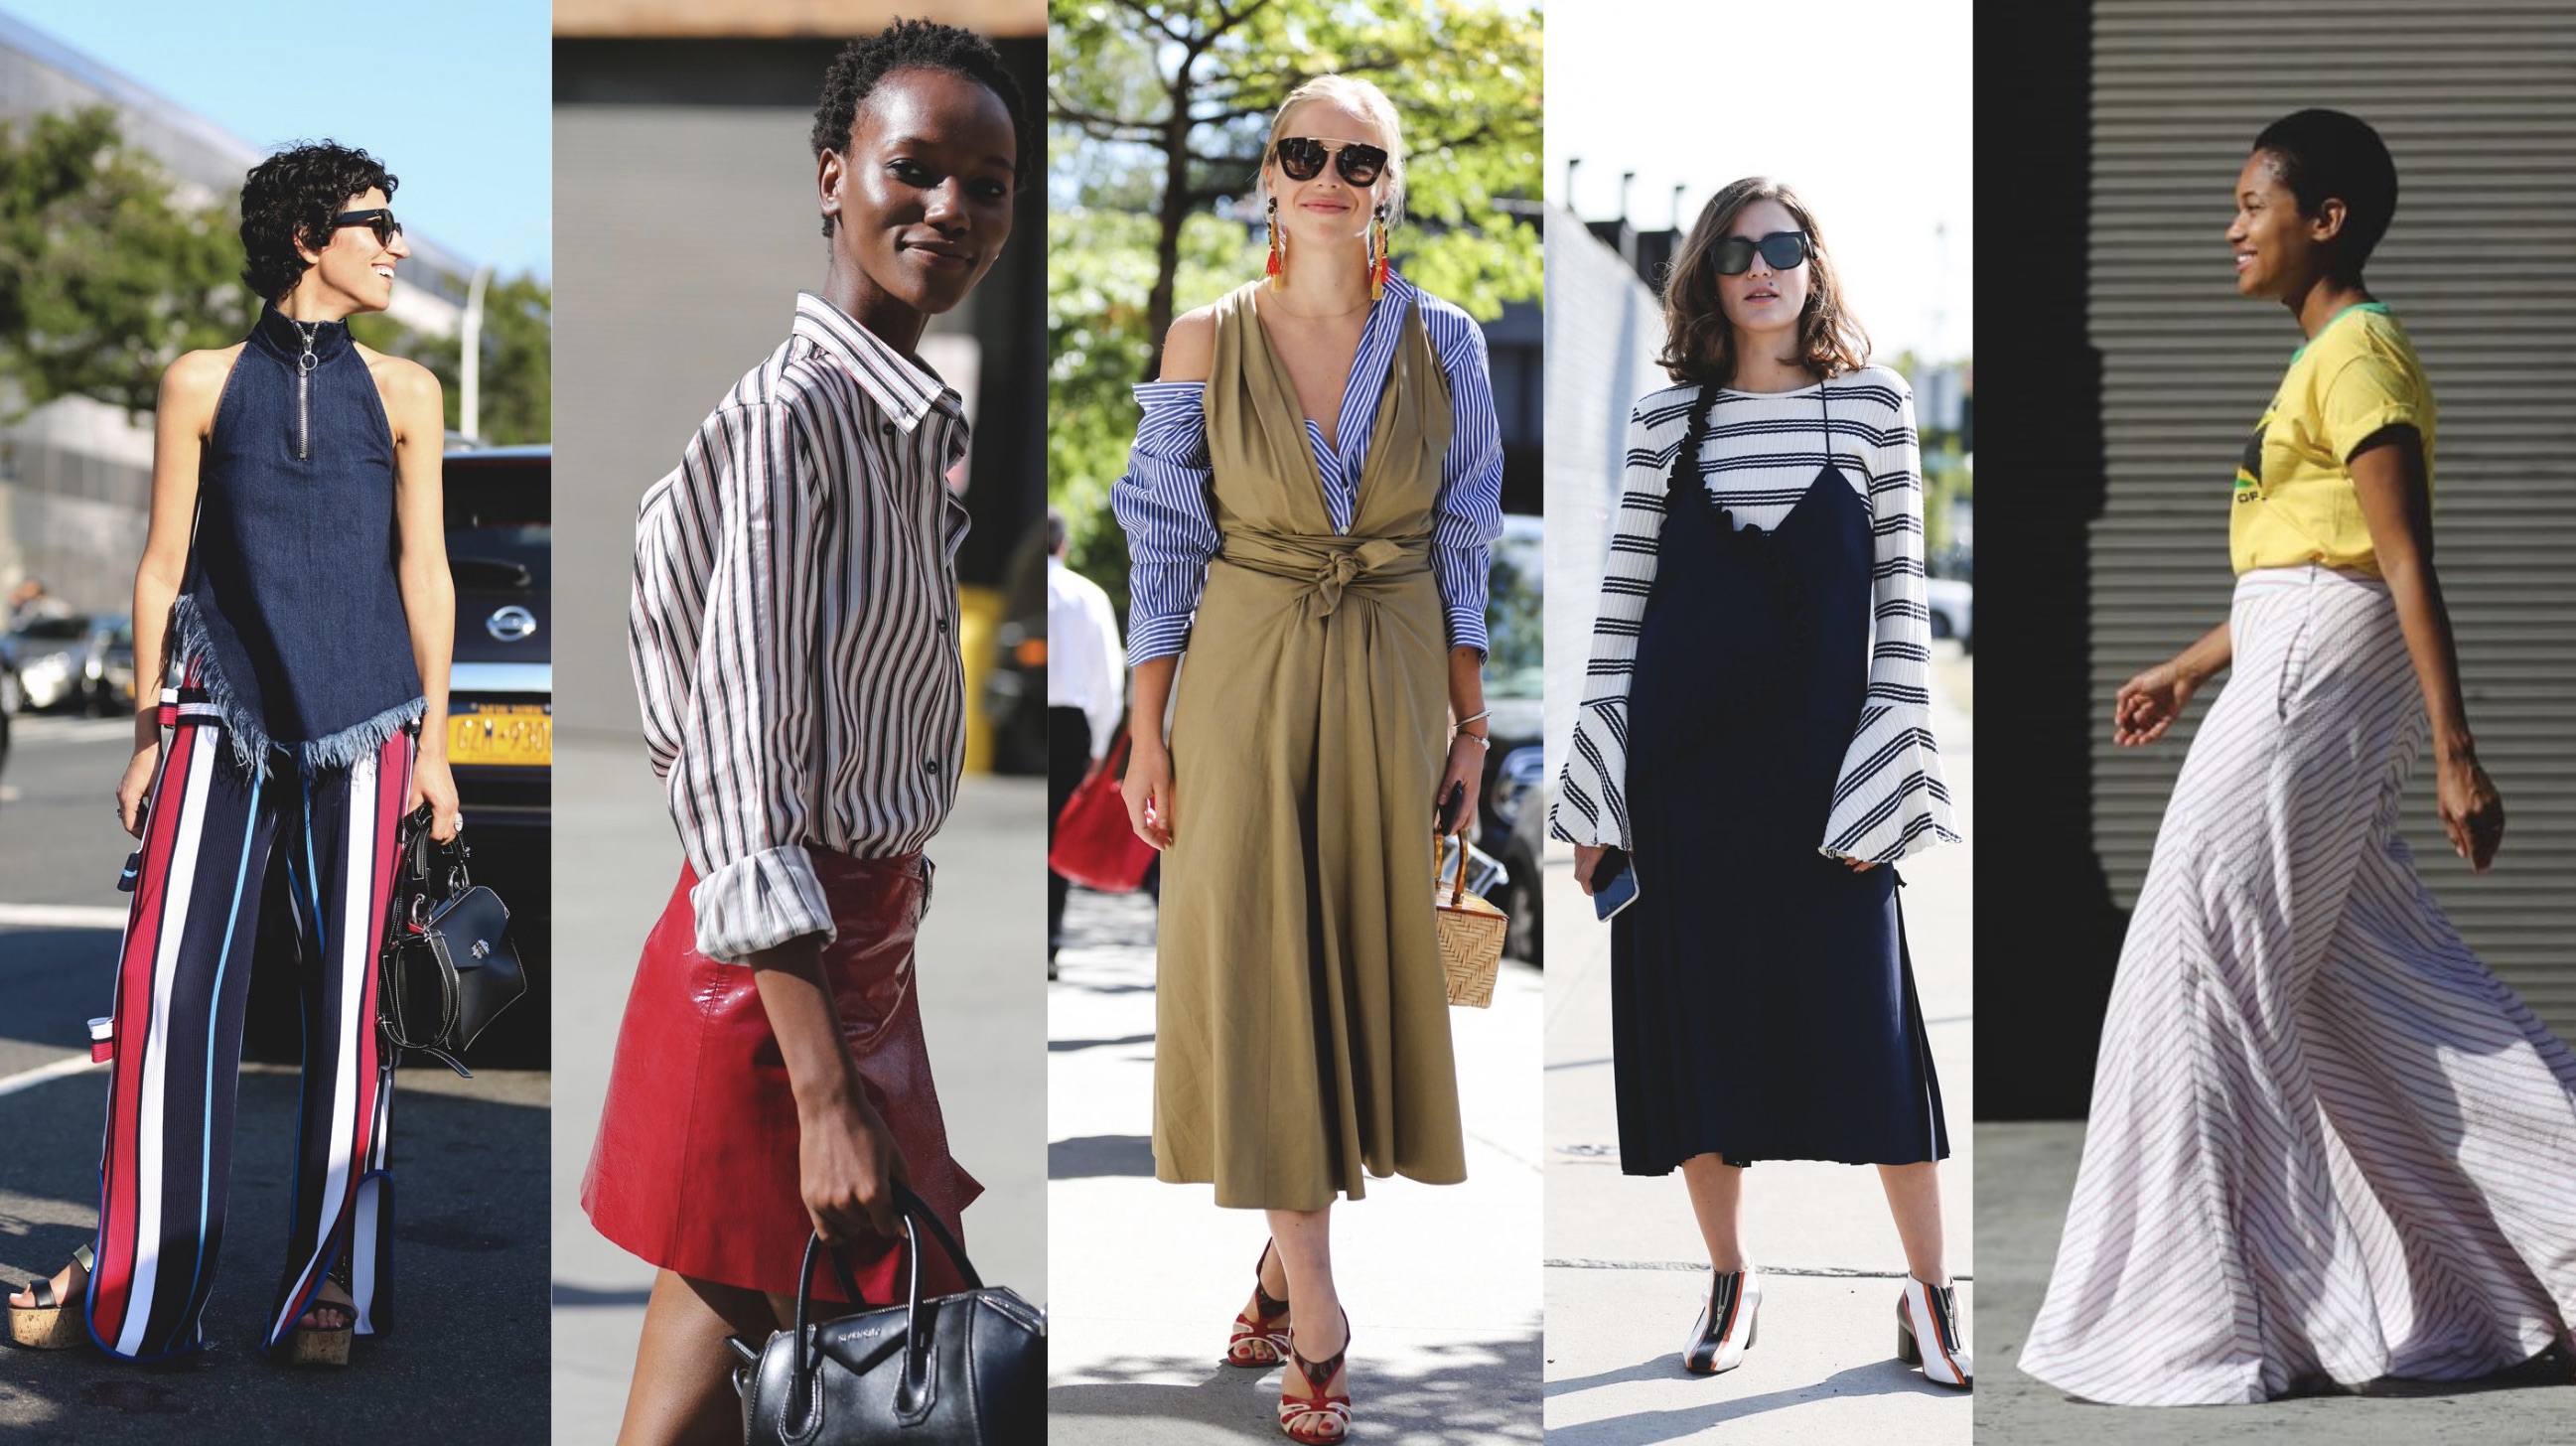 The Grey Edit-NYFW Street Style Looks by Trend-Integrated Stripes